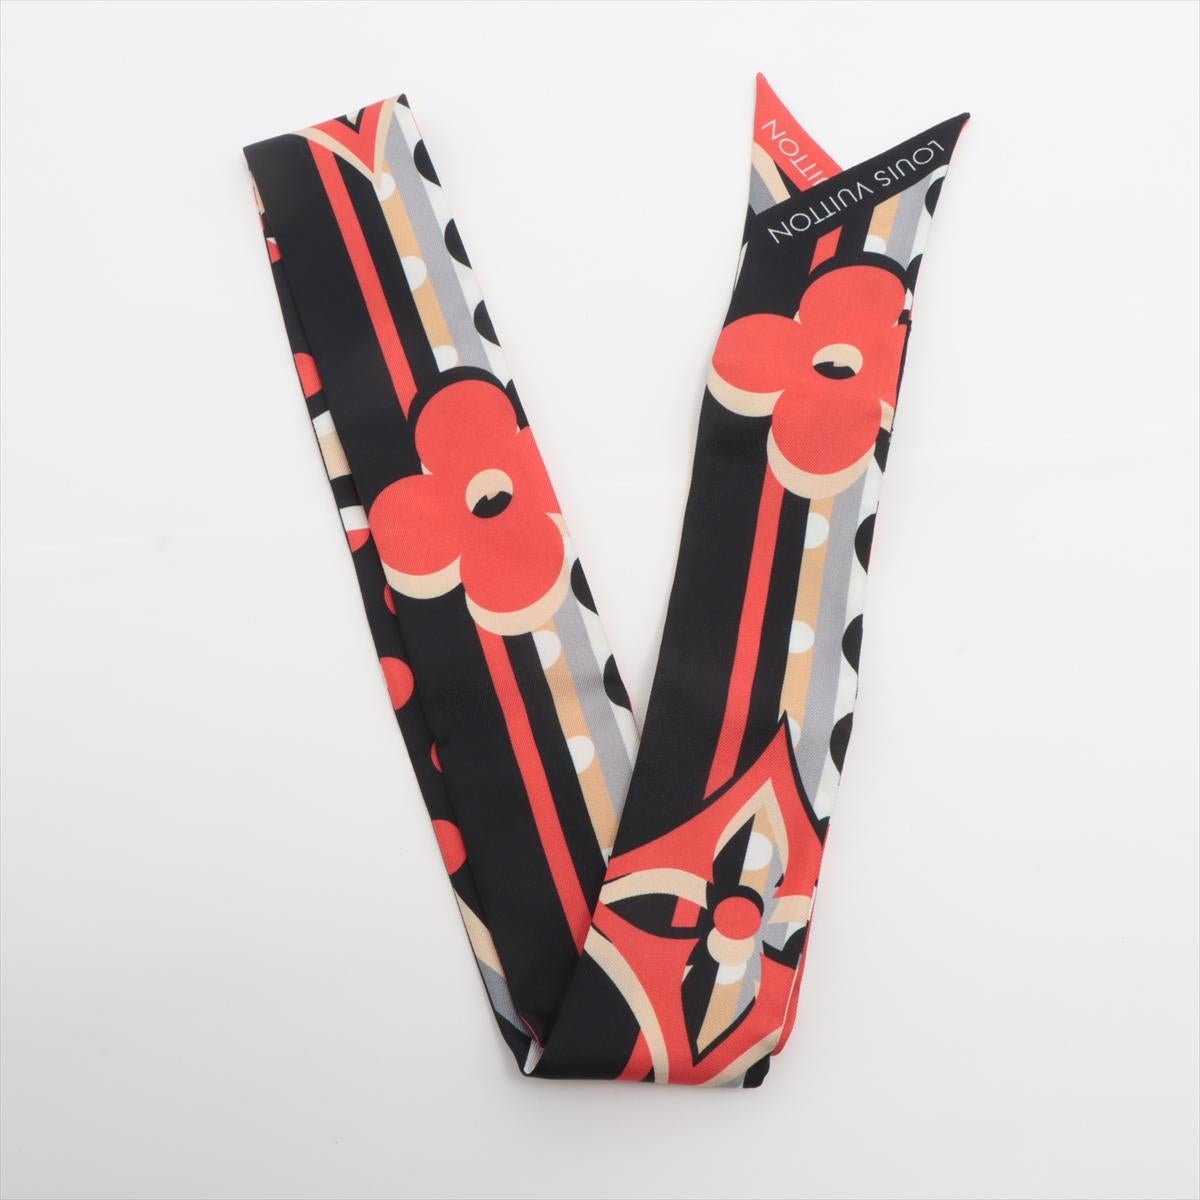 The Louis Vuitton Bandeau BB Pop Monogram in Red a vibrant and stylish accessory that adds a pop of color to your ensemble.The bandeau features the iconic Monogram pattern in a playful and contemporary design. The red color enhances the bold and